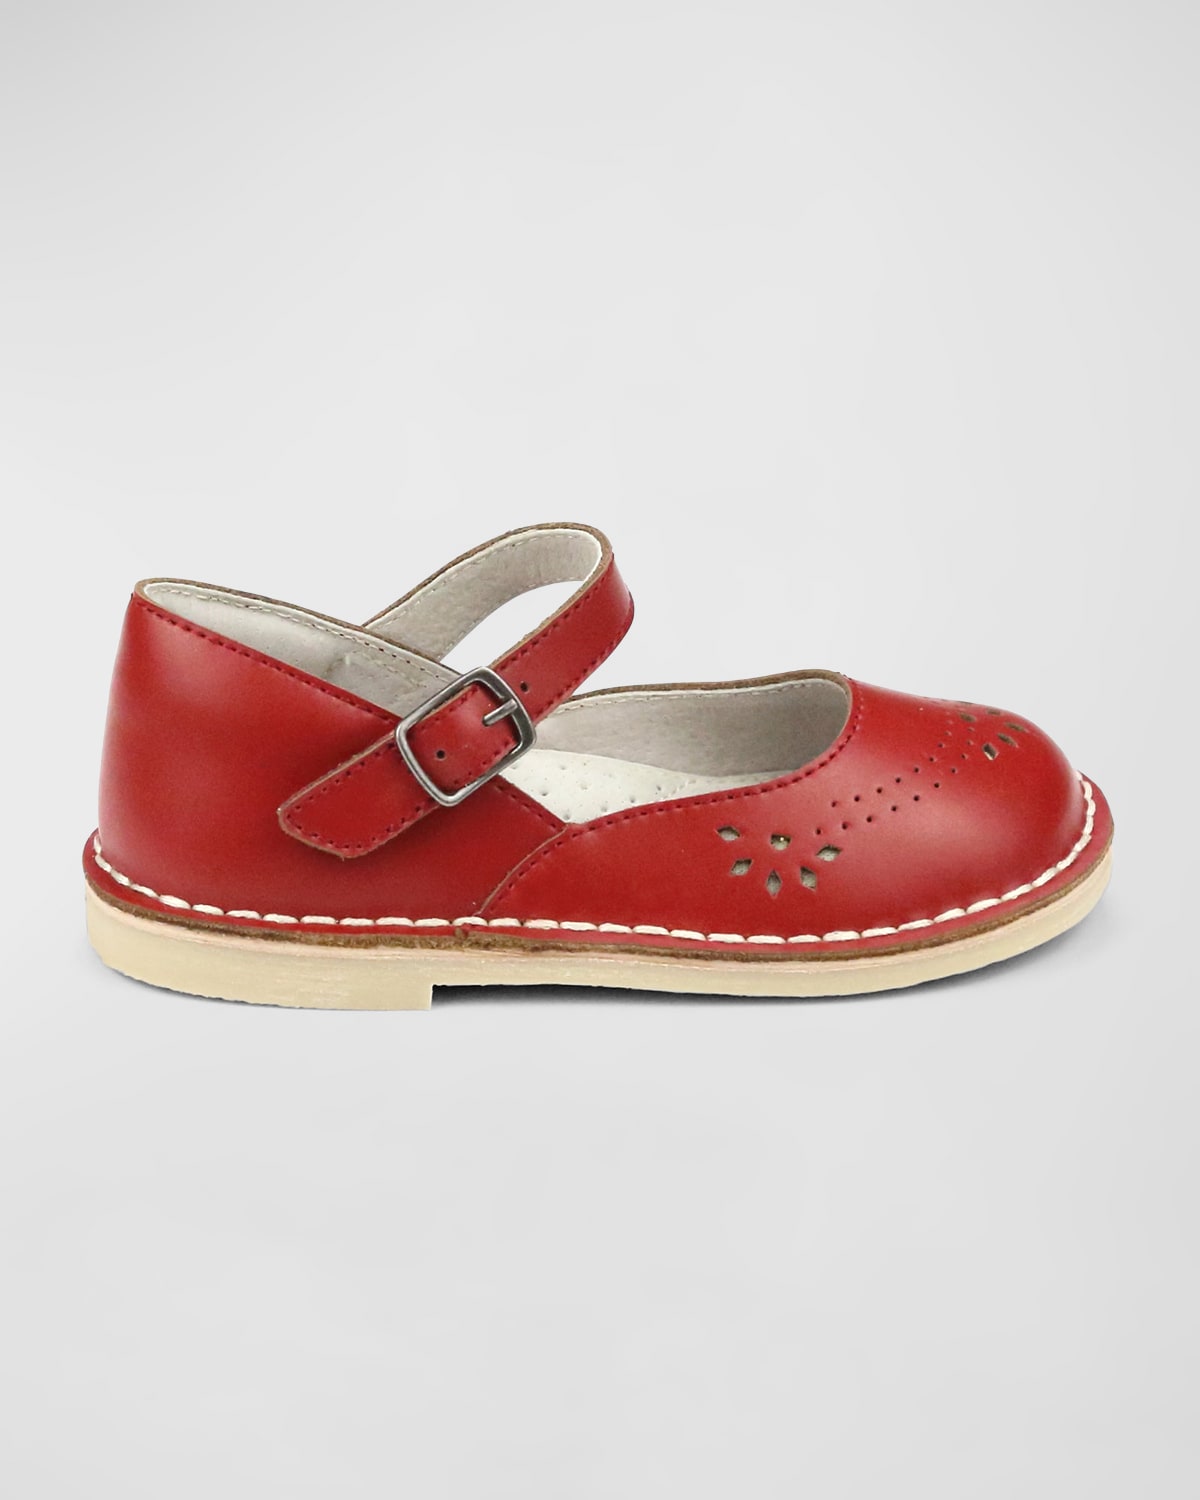 L'amour Shoes Girl's Antonia Grip-strap Mary Jane Shoes, Baby/toddler/kids In Red